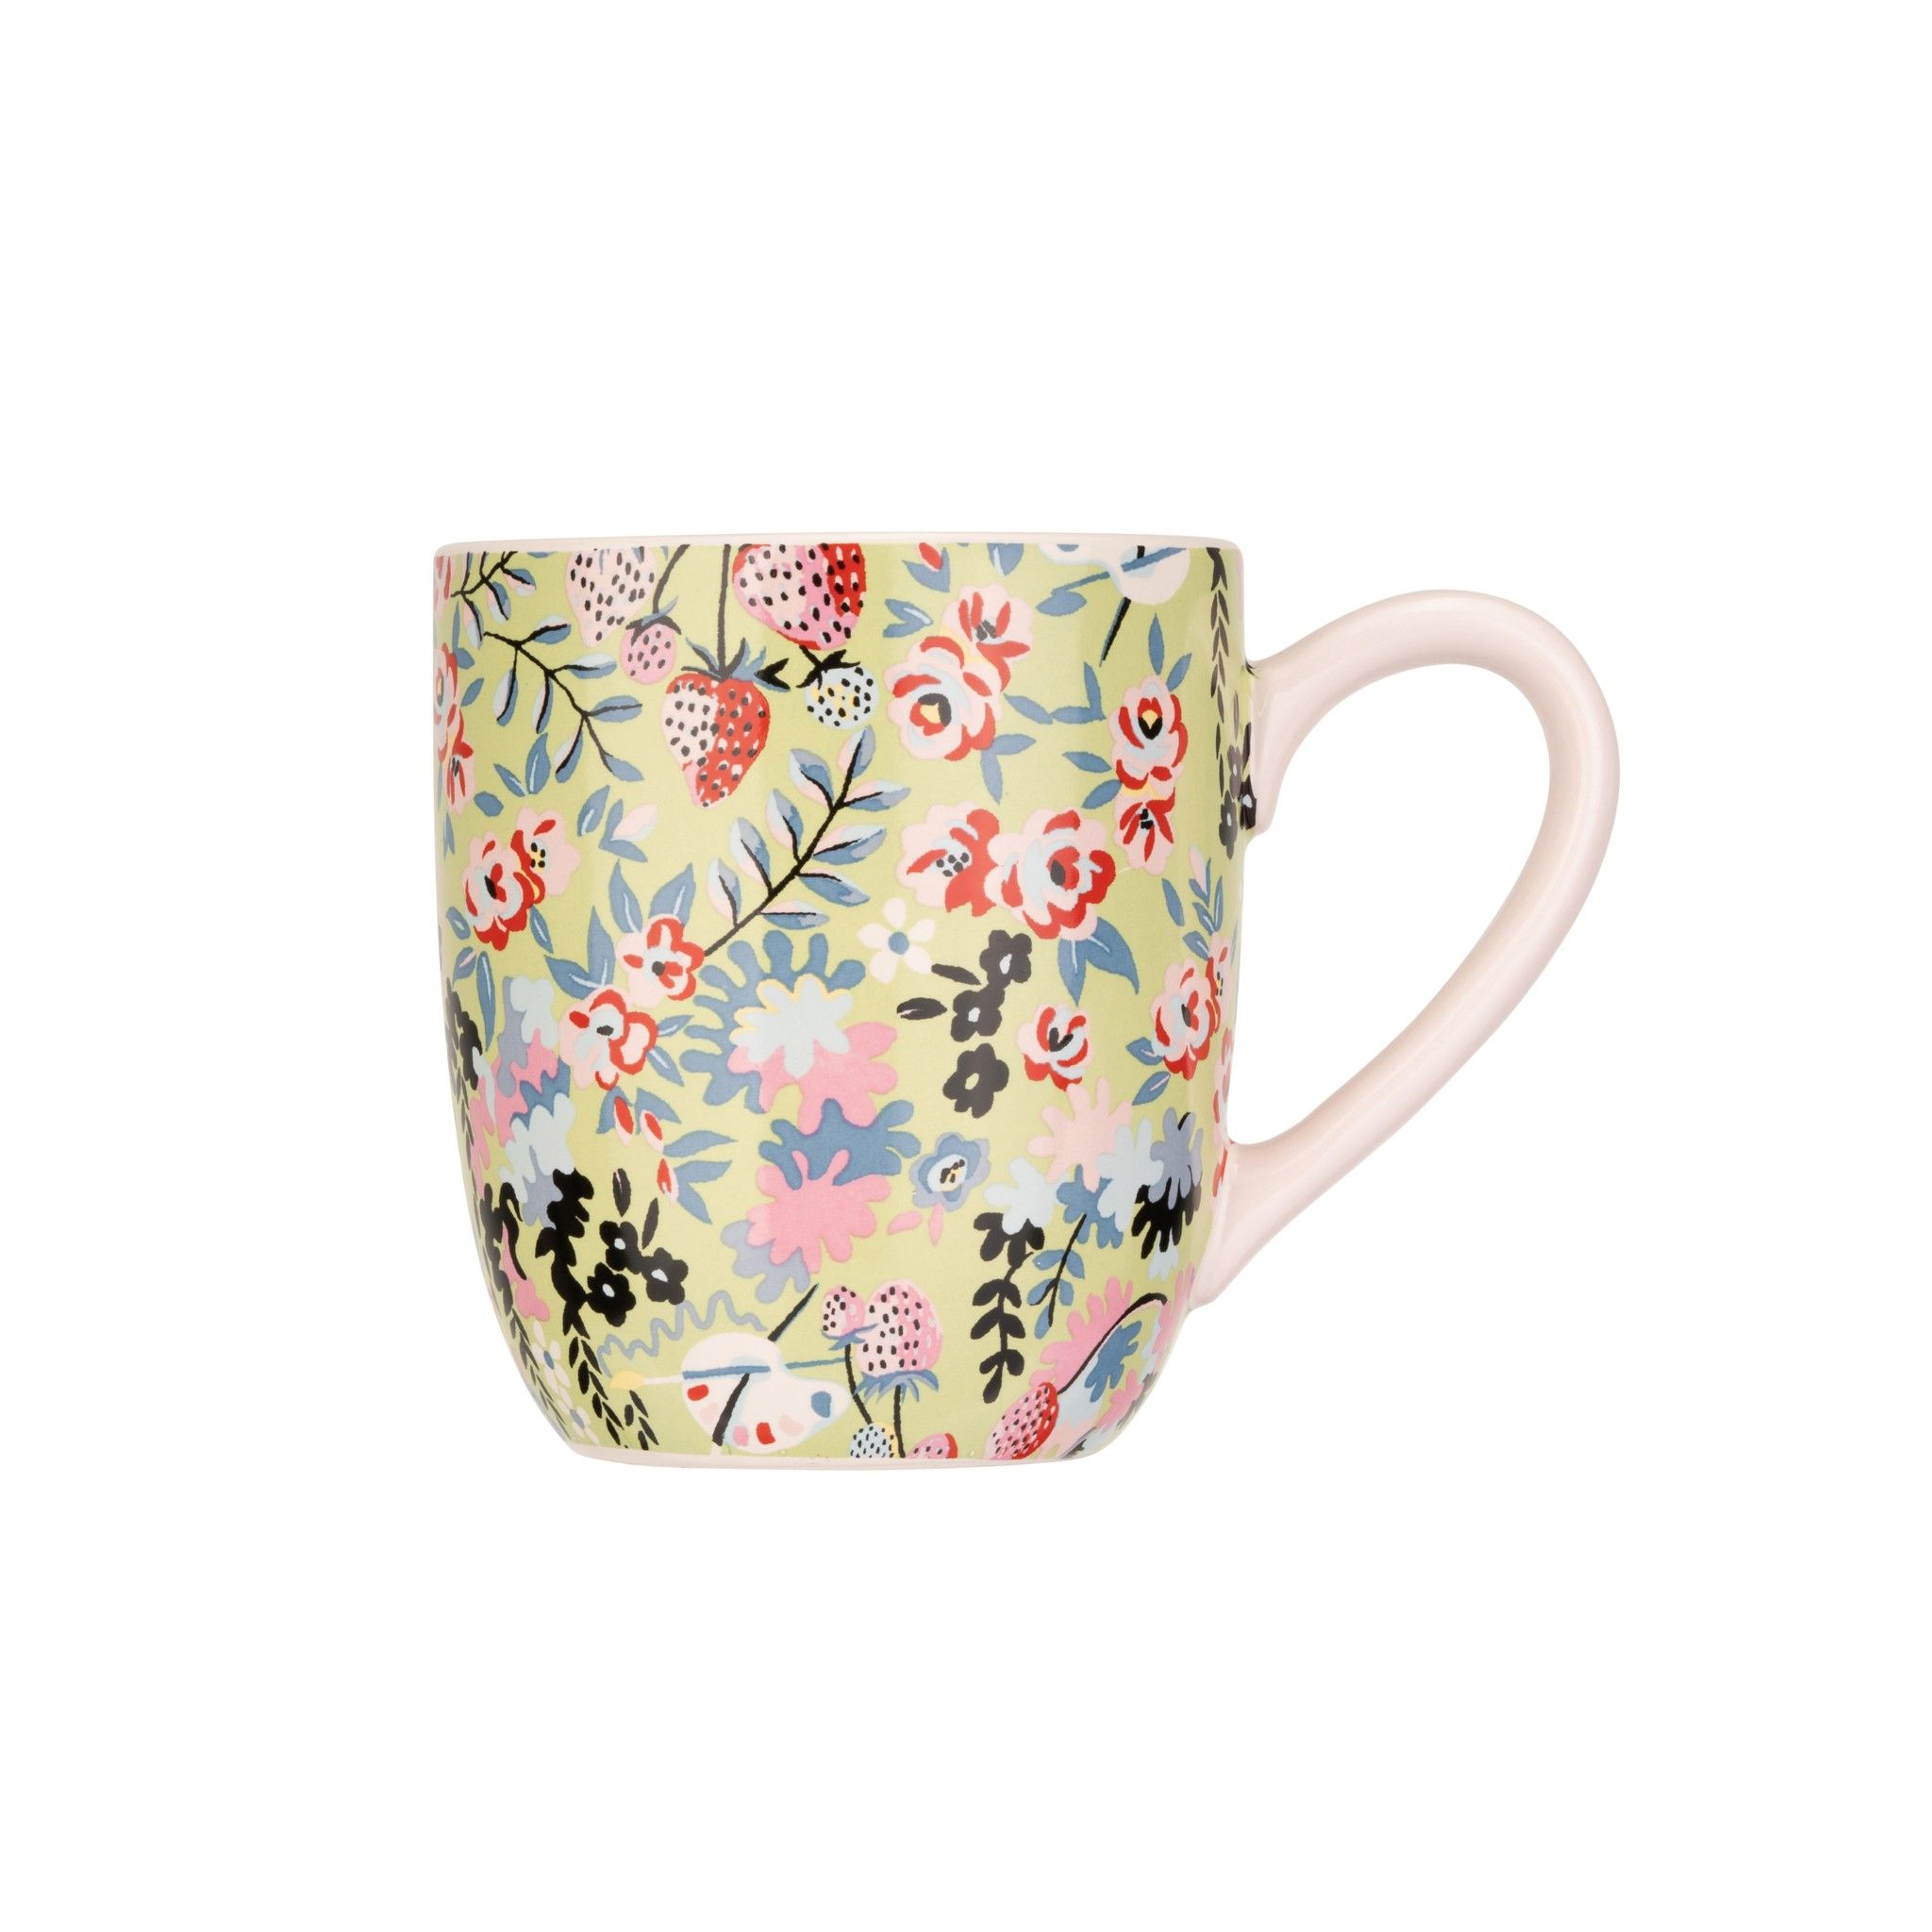  Ly/Mugs - Painted Table Ditsy Floral Breakfast - Green 